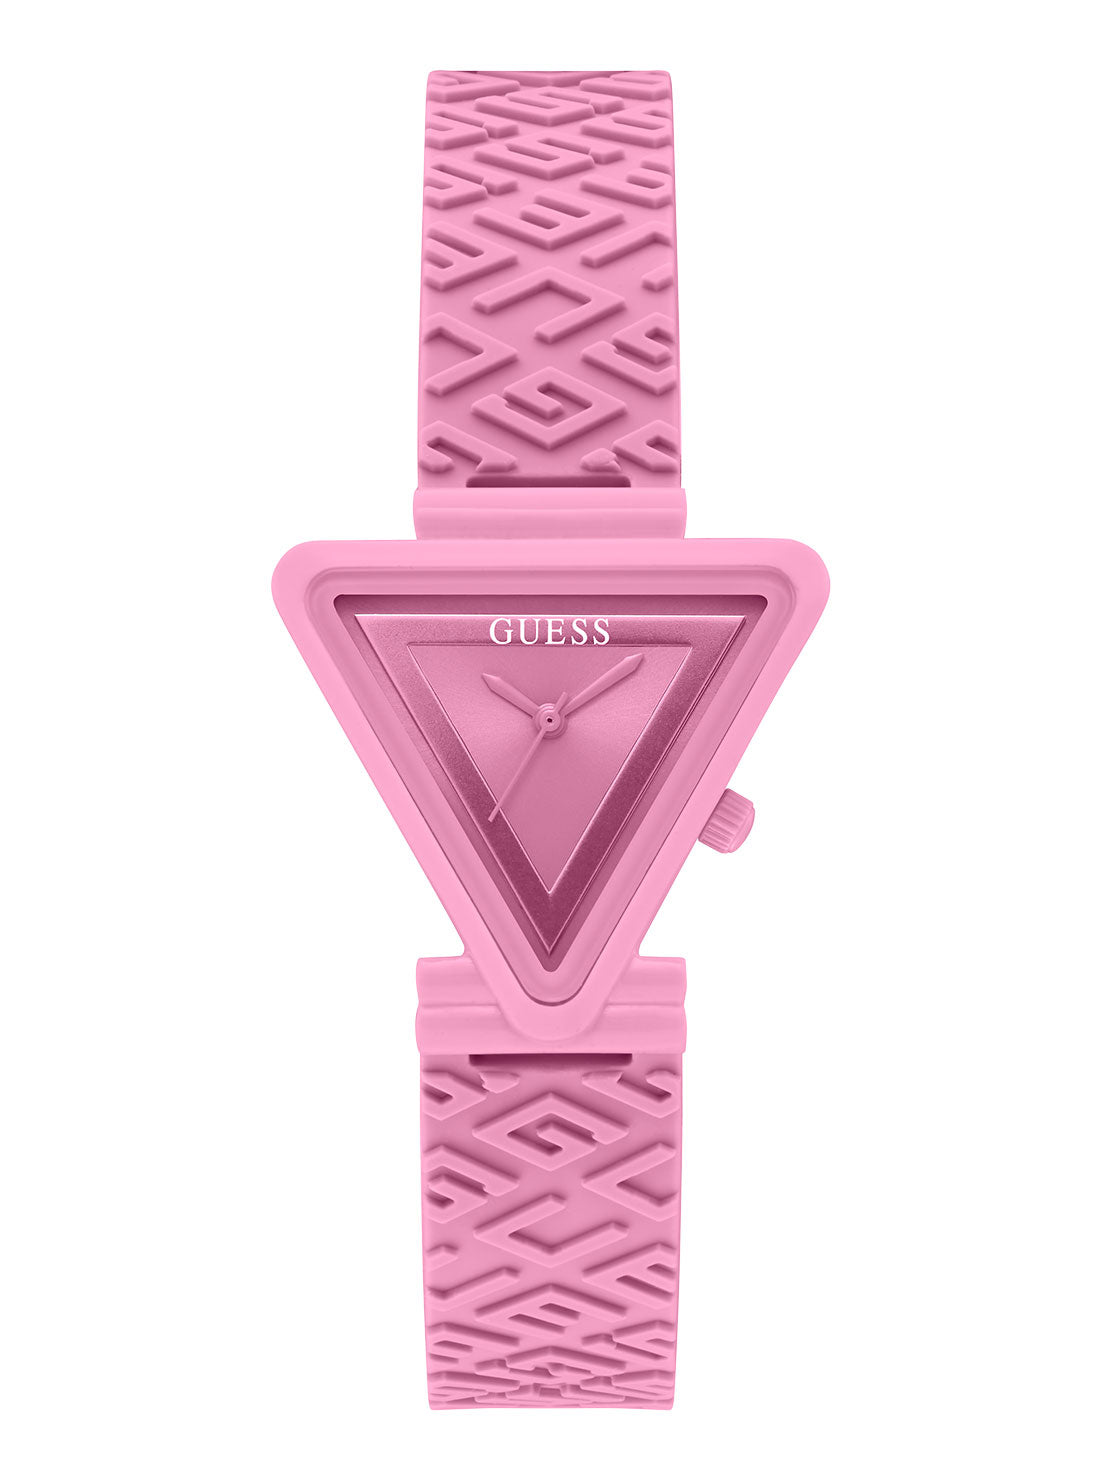 GUESS Women's Pink Fame Logo Silicone Watch GW0543L2 Front View